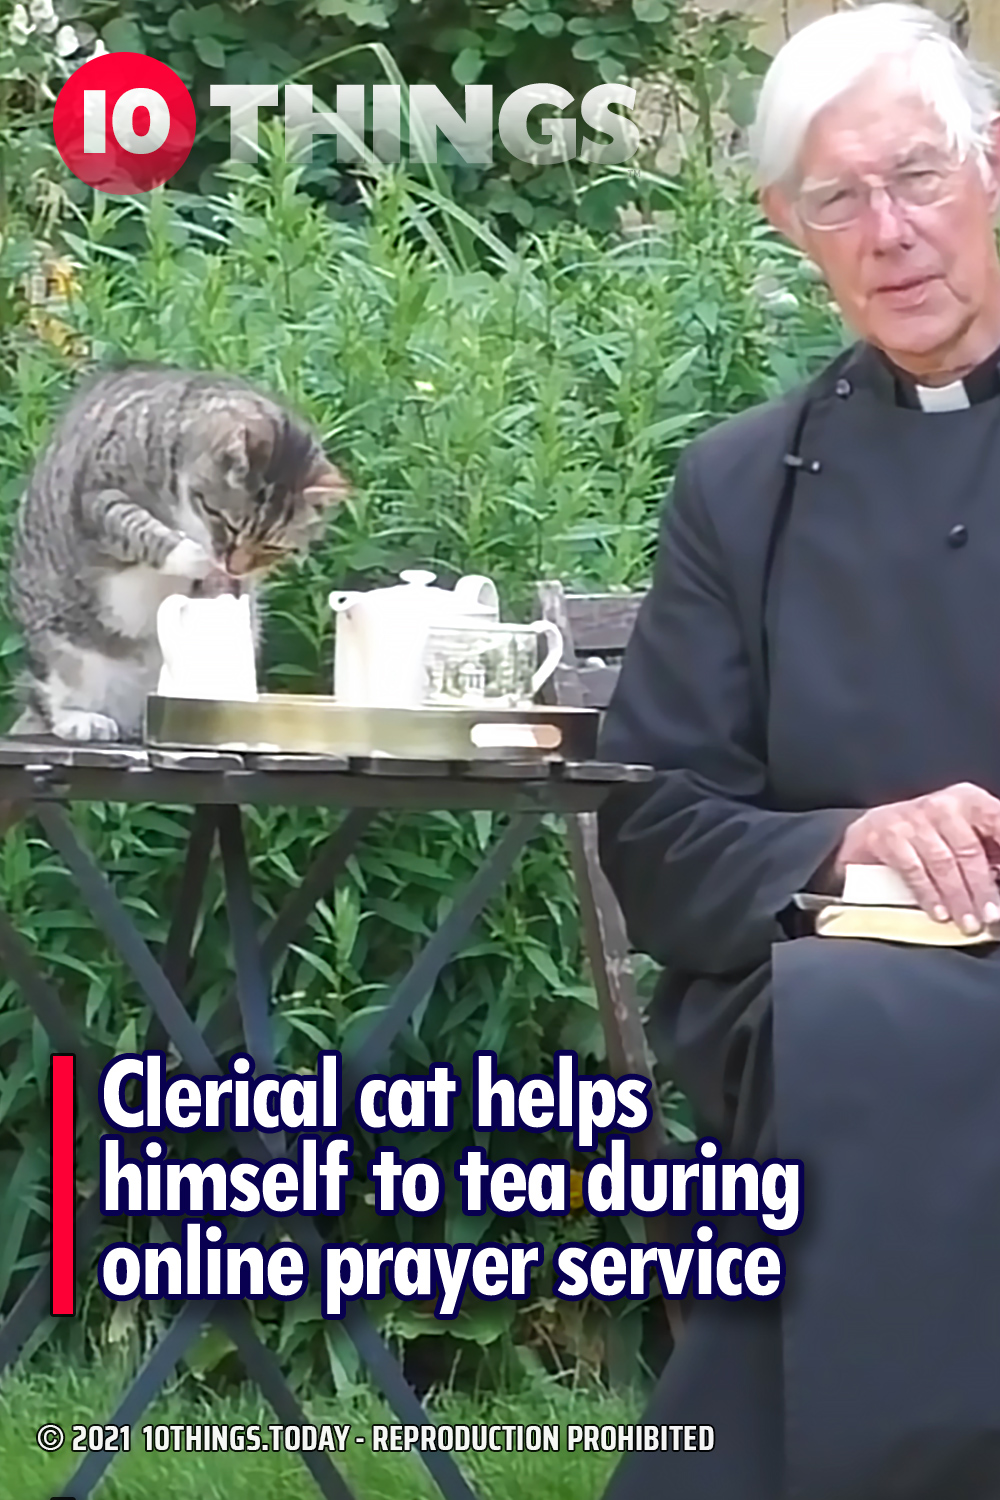 Clerical cat helps himself to tea during online prayer service